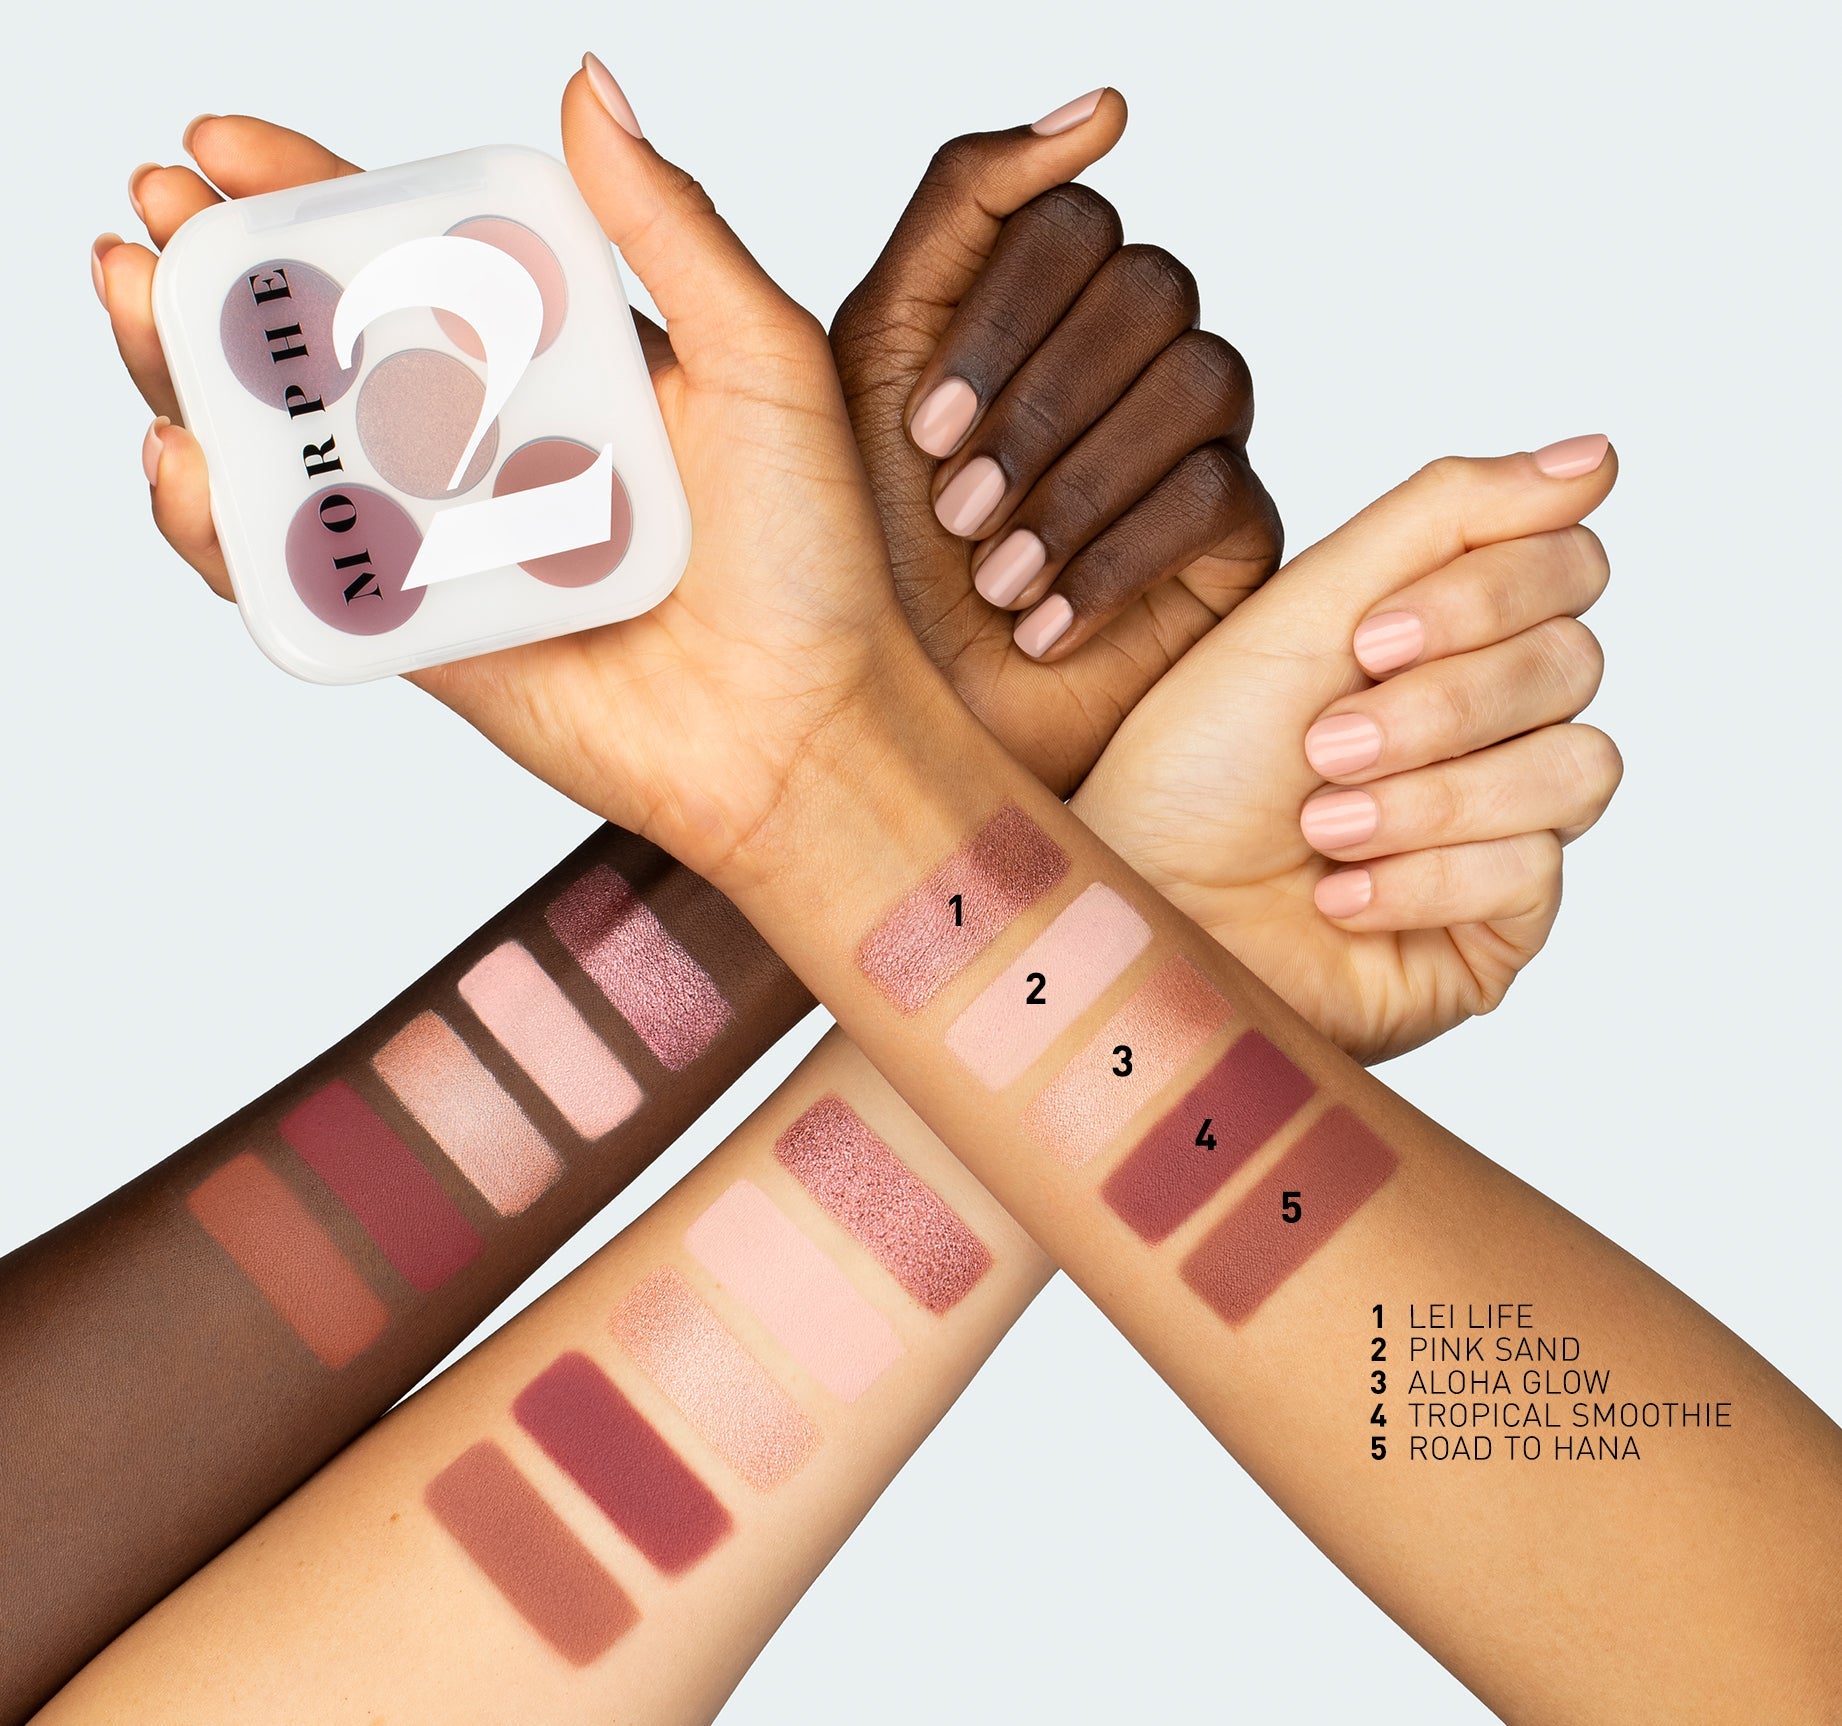 Ready In 5 Eyeshadow Palette - From Hawaii With Love - Image 5